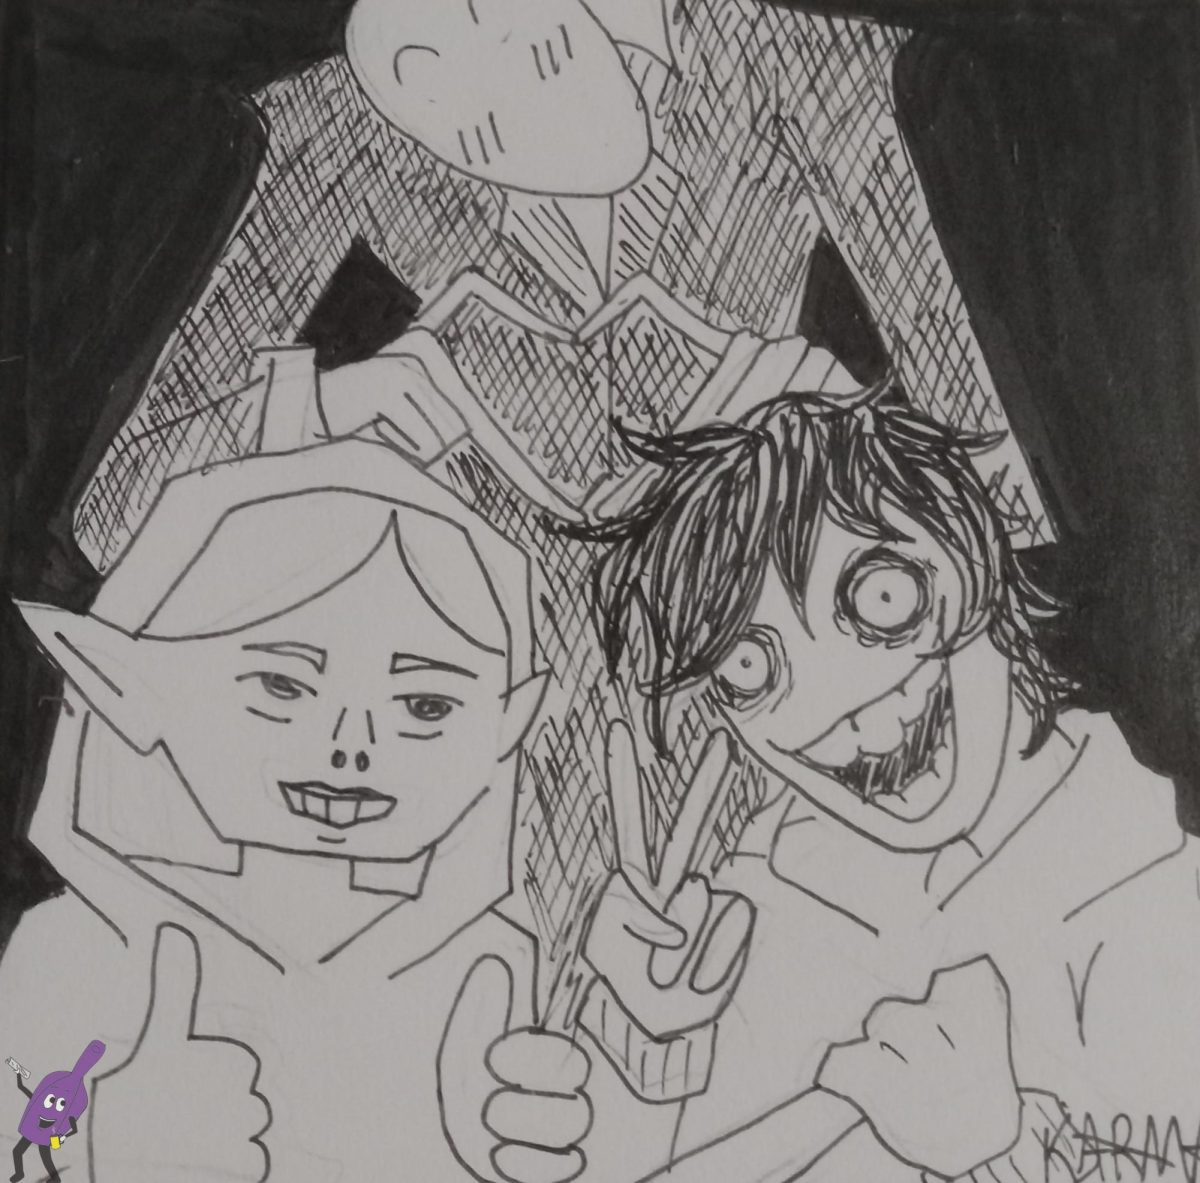 A drawn image of Slenderman, Ben Drowned, and Jeff the Killer looking at the camera.